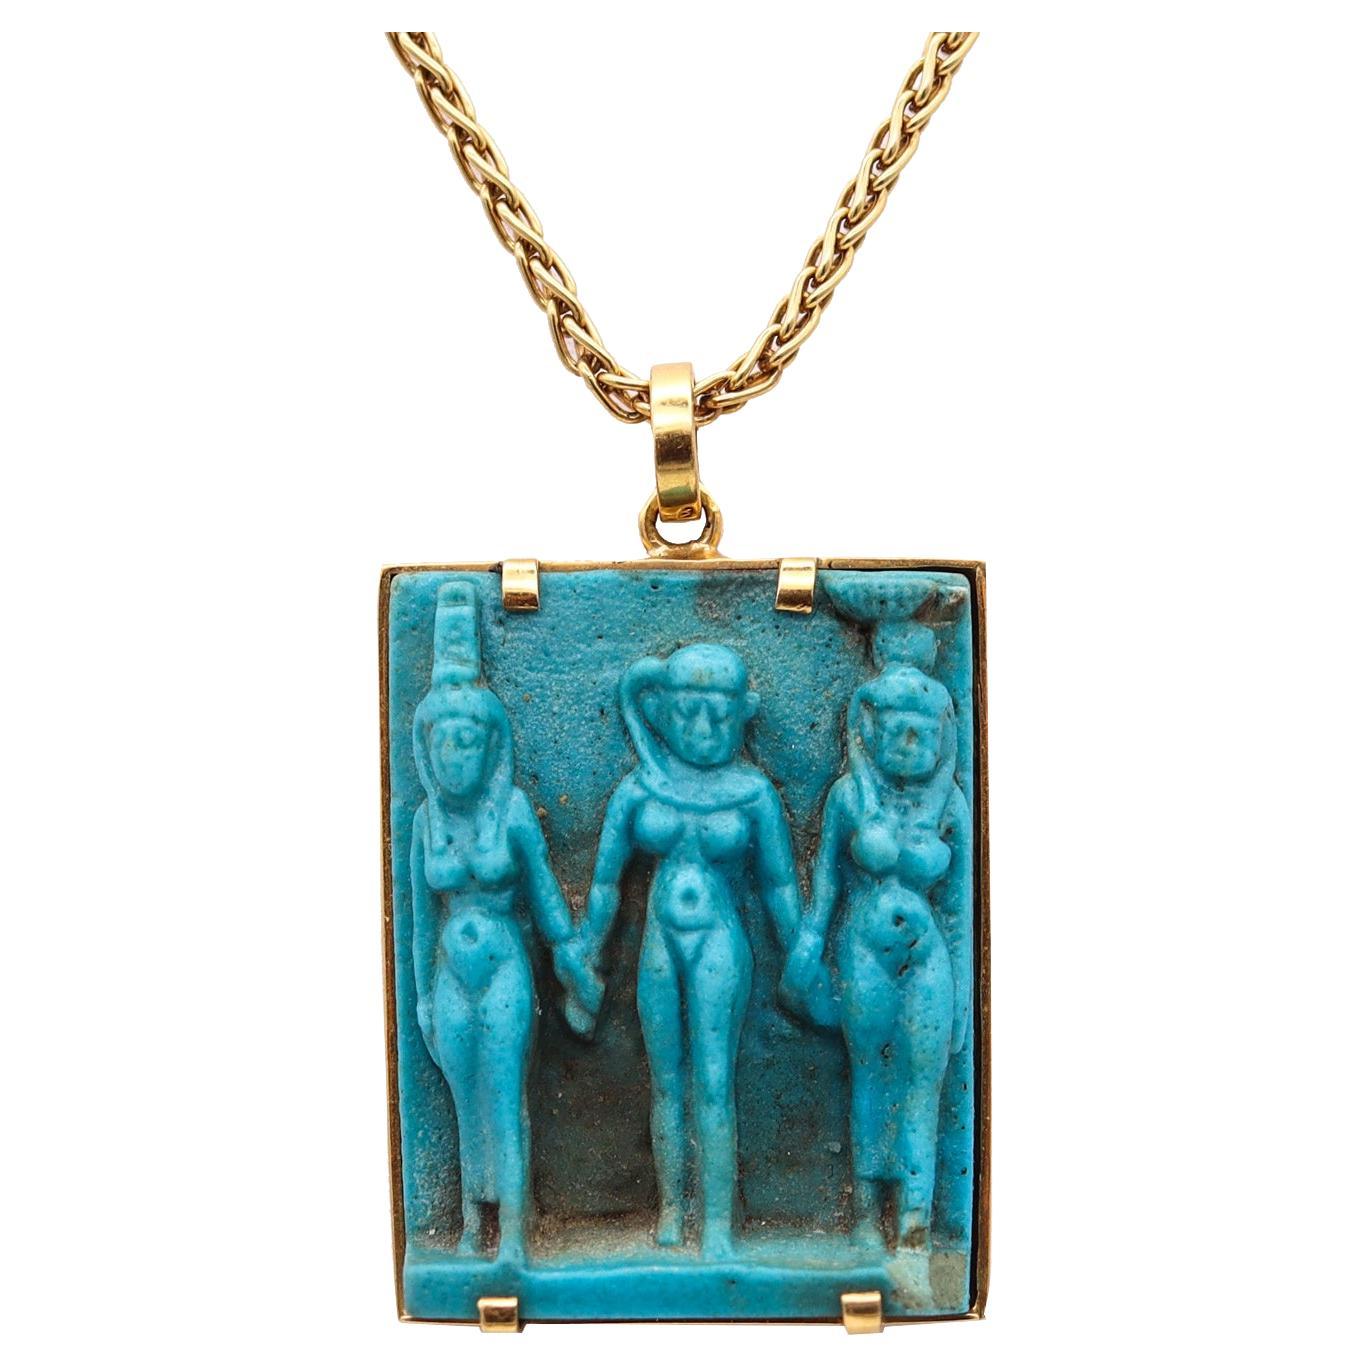 Egyptian Revival 664 BC Blue Faience Triad of Gods Pendant in 18kt Yellow Gold